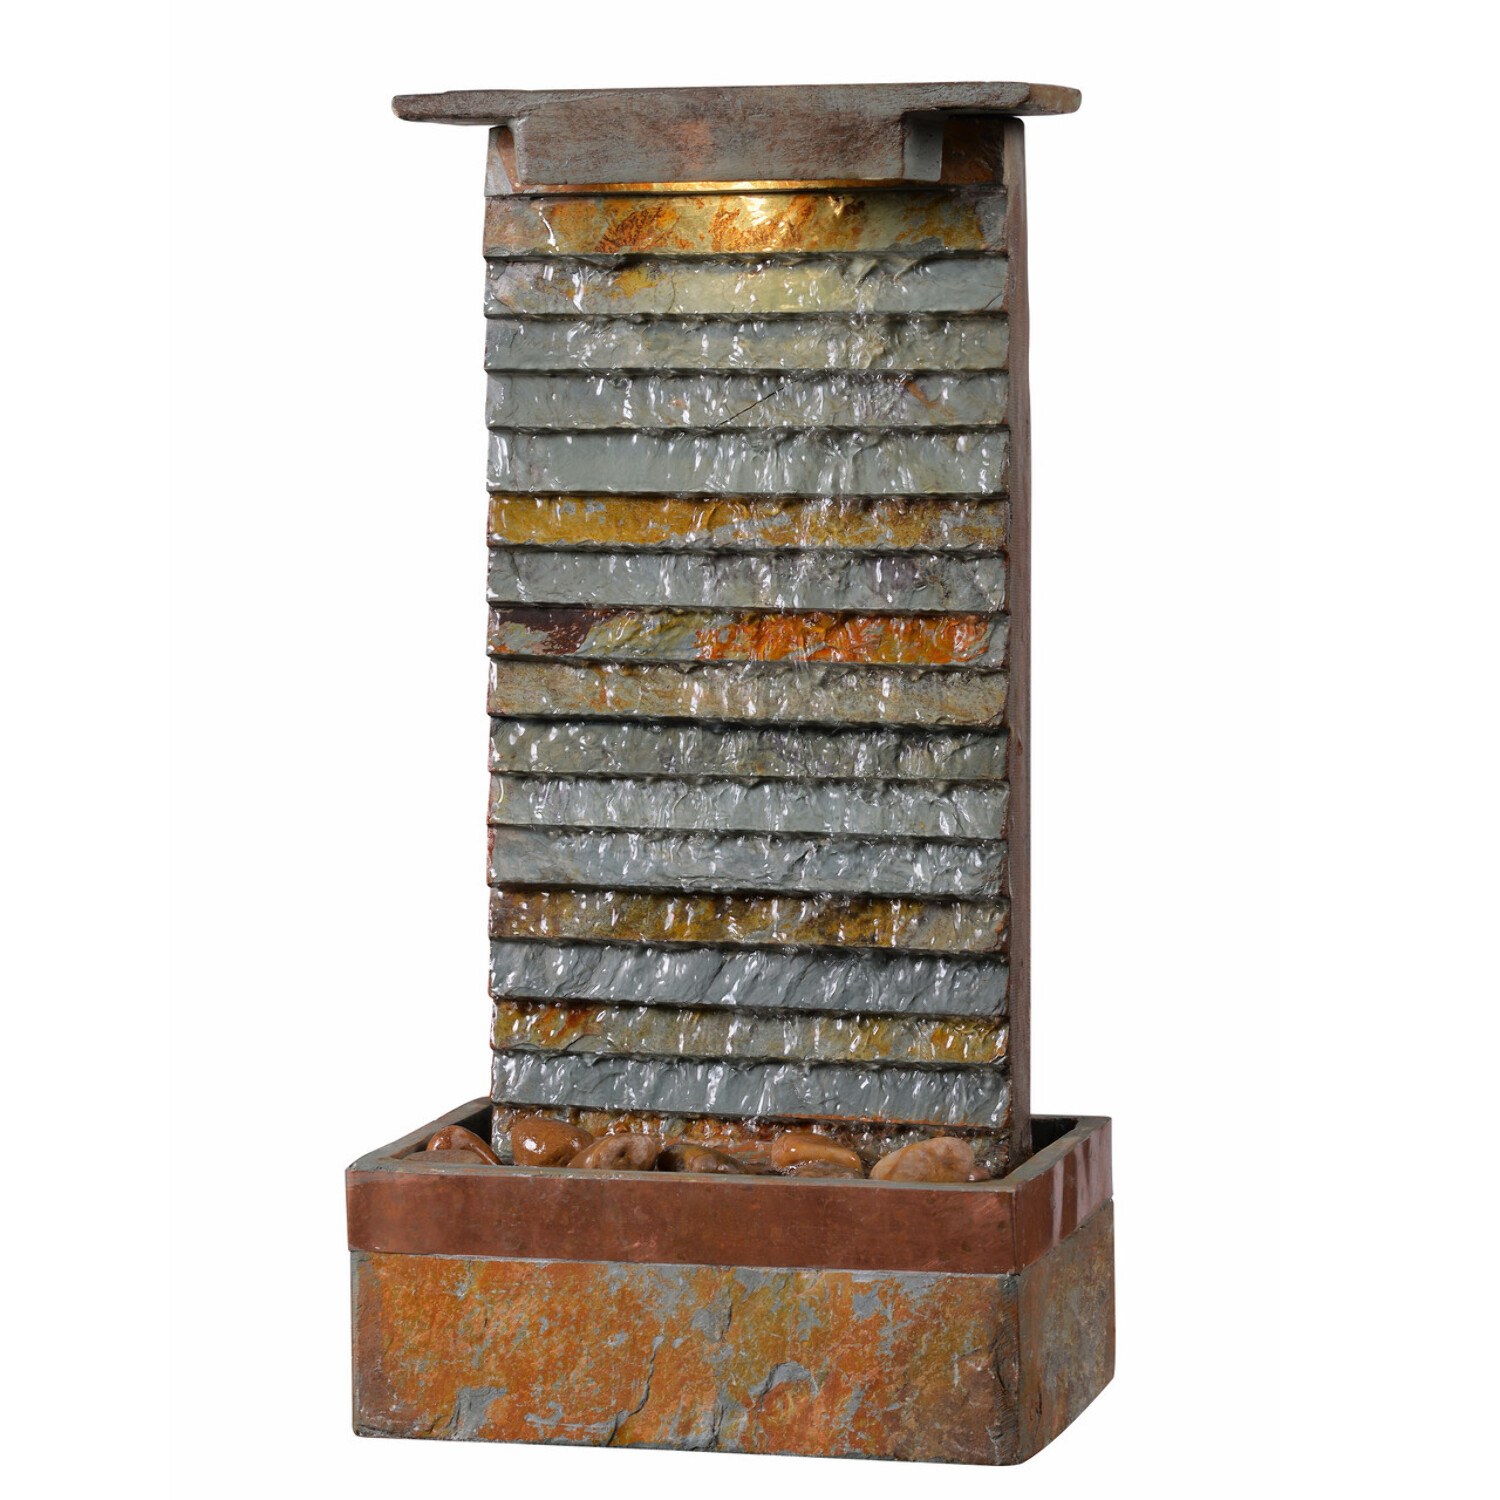 Stave Indoor/Outdoor Table Fountain with Copper Finish - image 2 of 8